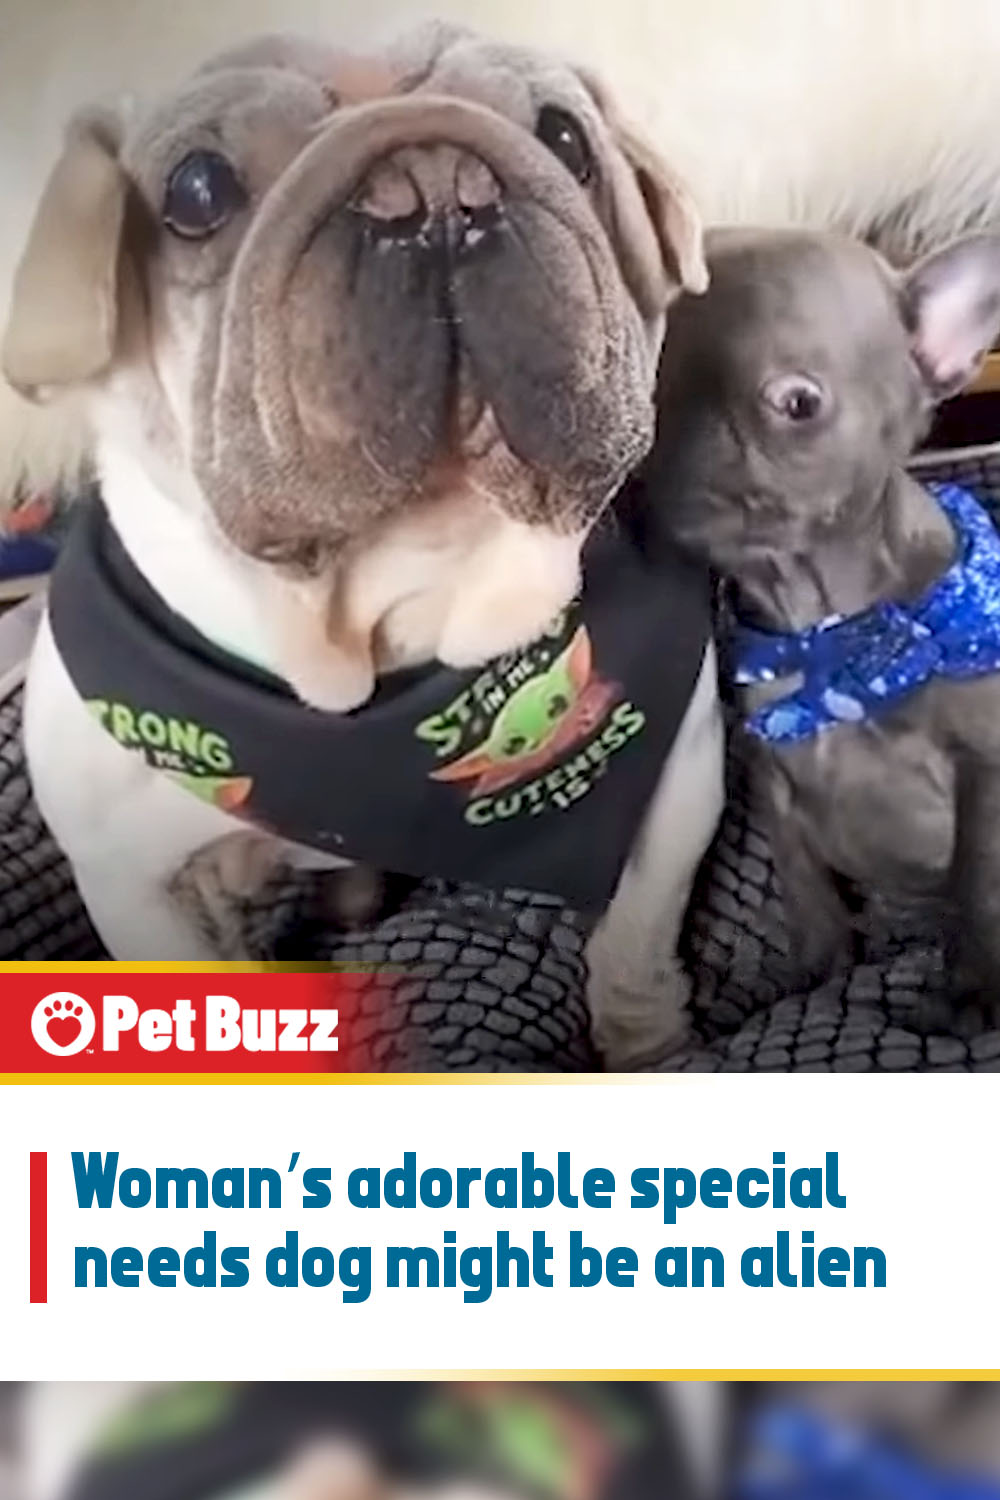 Woman’s adorable special needs dog might be an alien